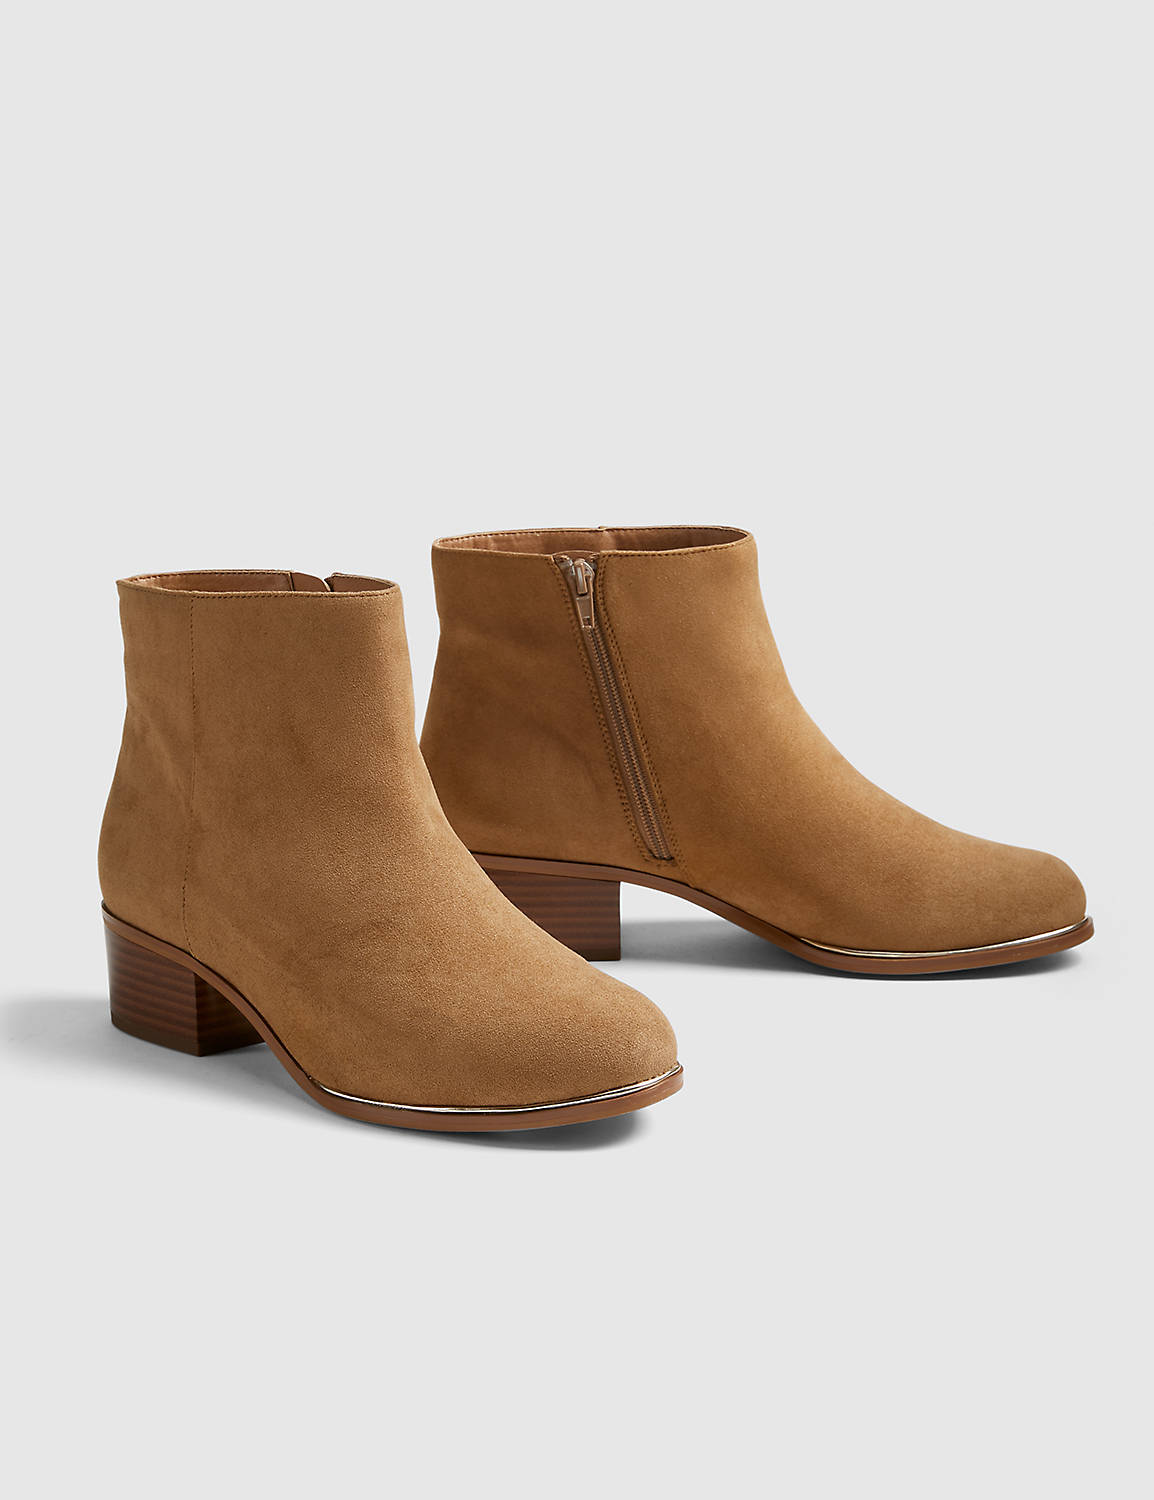 Taupe Suede Ankle Bootie with Rand:Taupe:12W Product Image 1